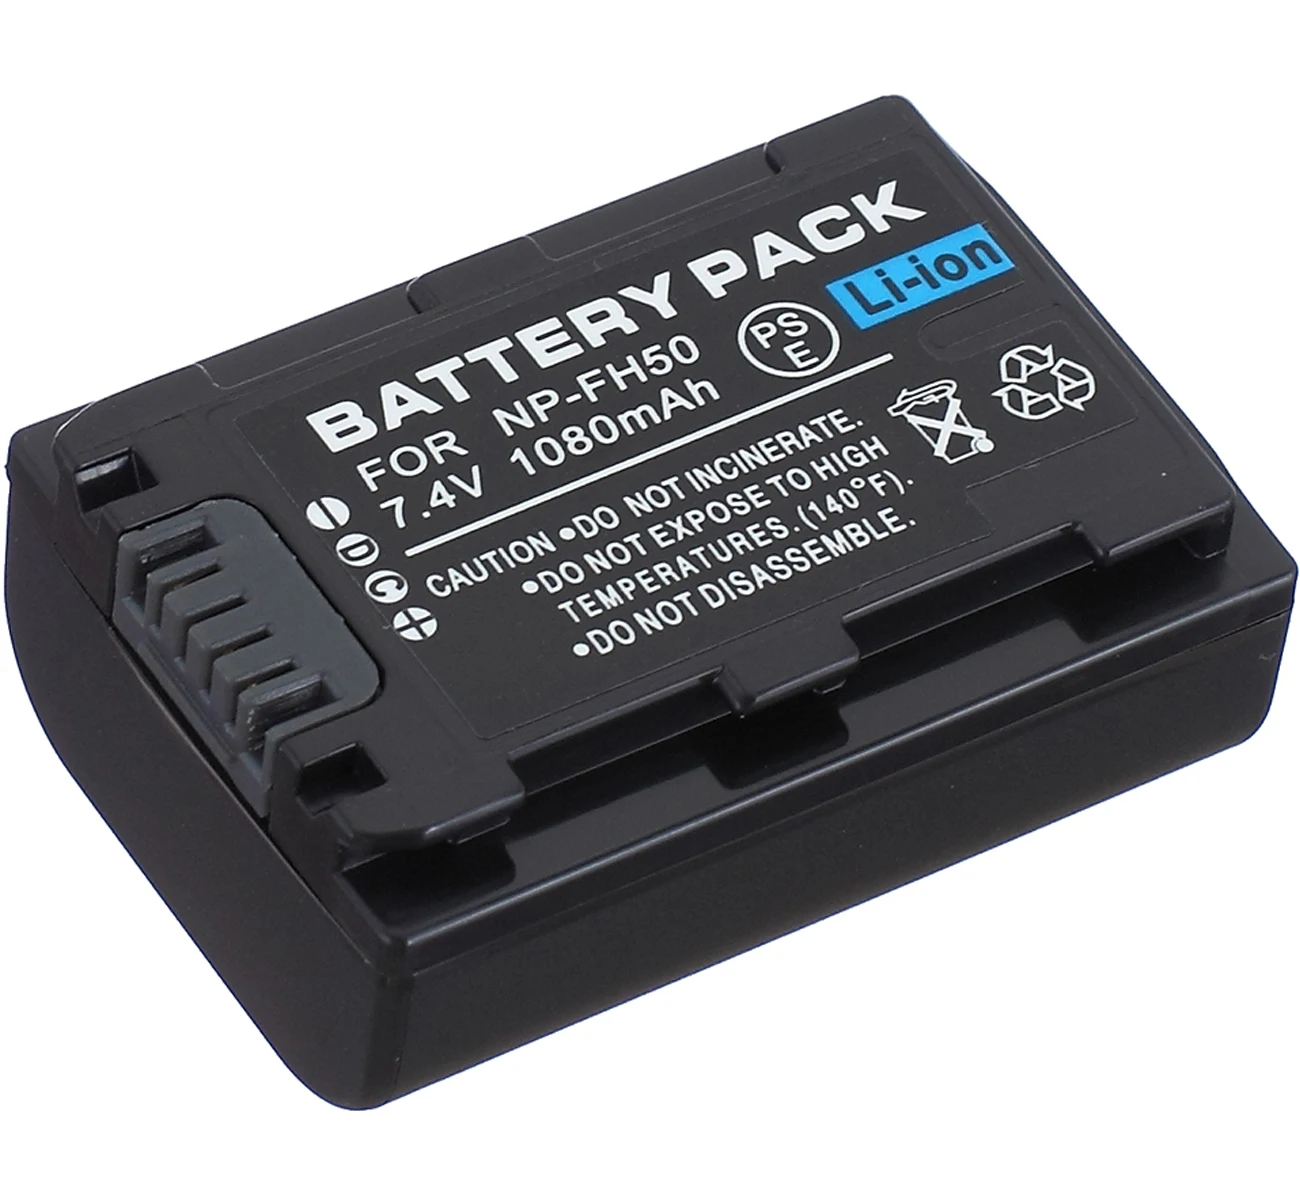 NP-FH50 Battery Pack for Sony Cyber-shot DSC-HX1, DSC-HX100, DSC-HX100V, DSC-HX200, DSC-HX200V Digital Camera